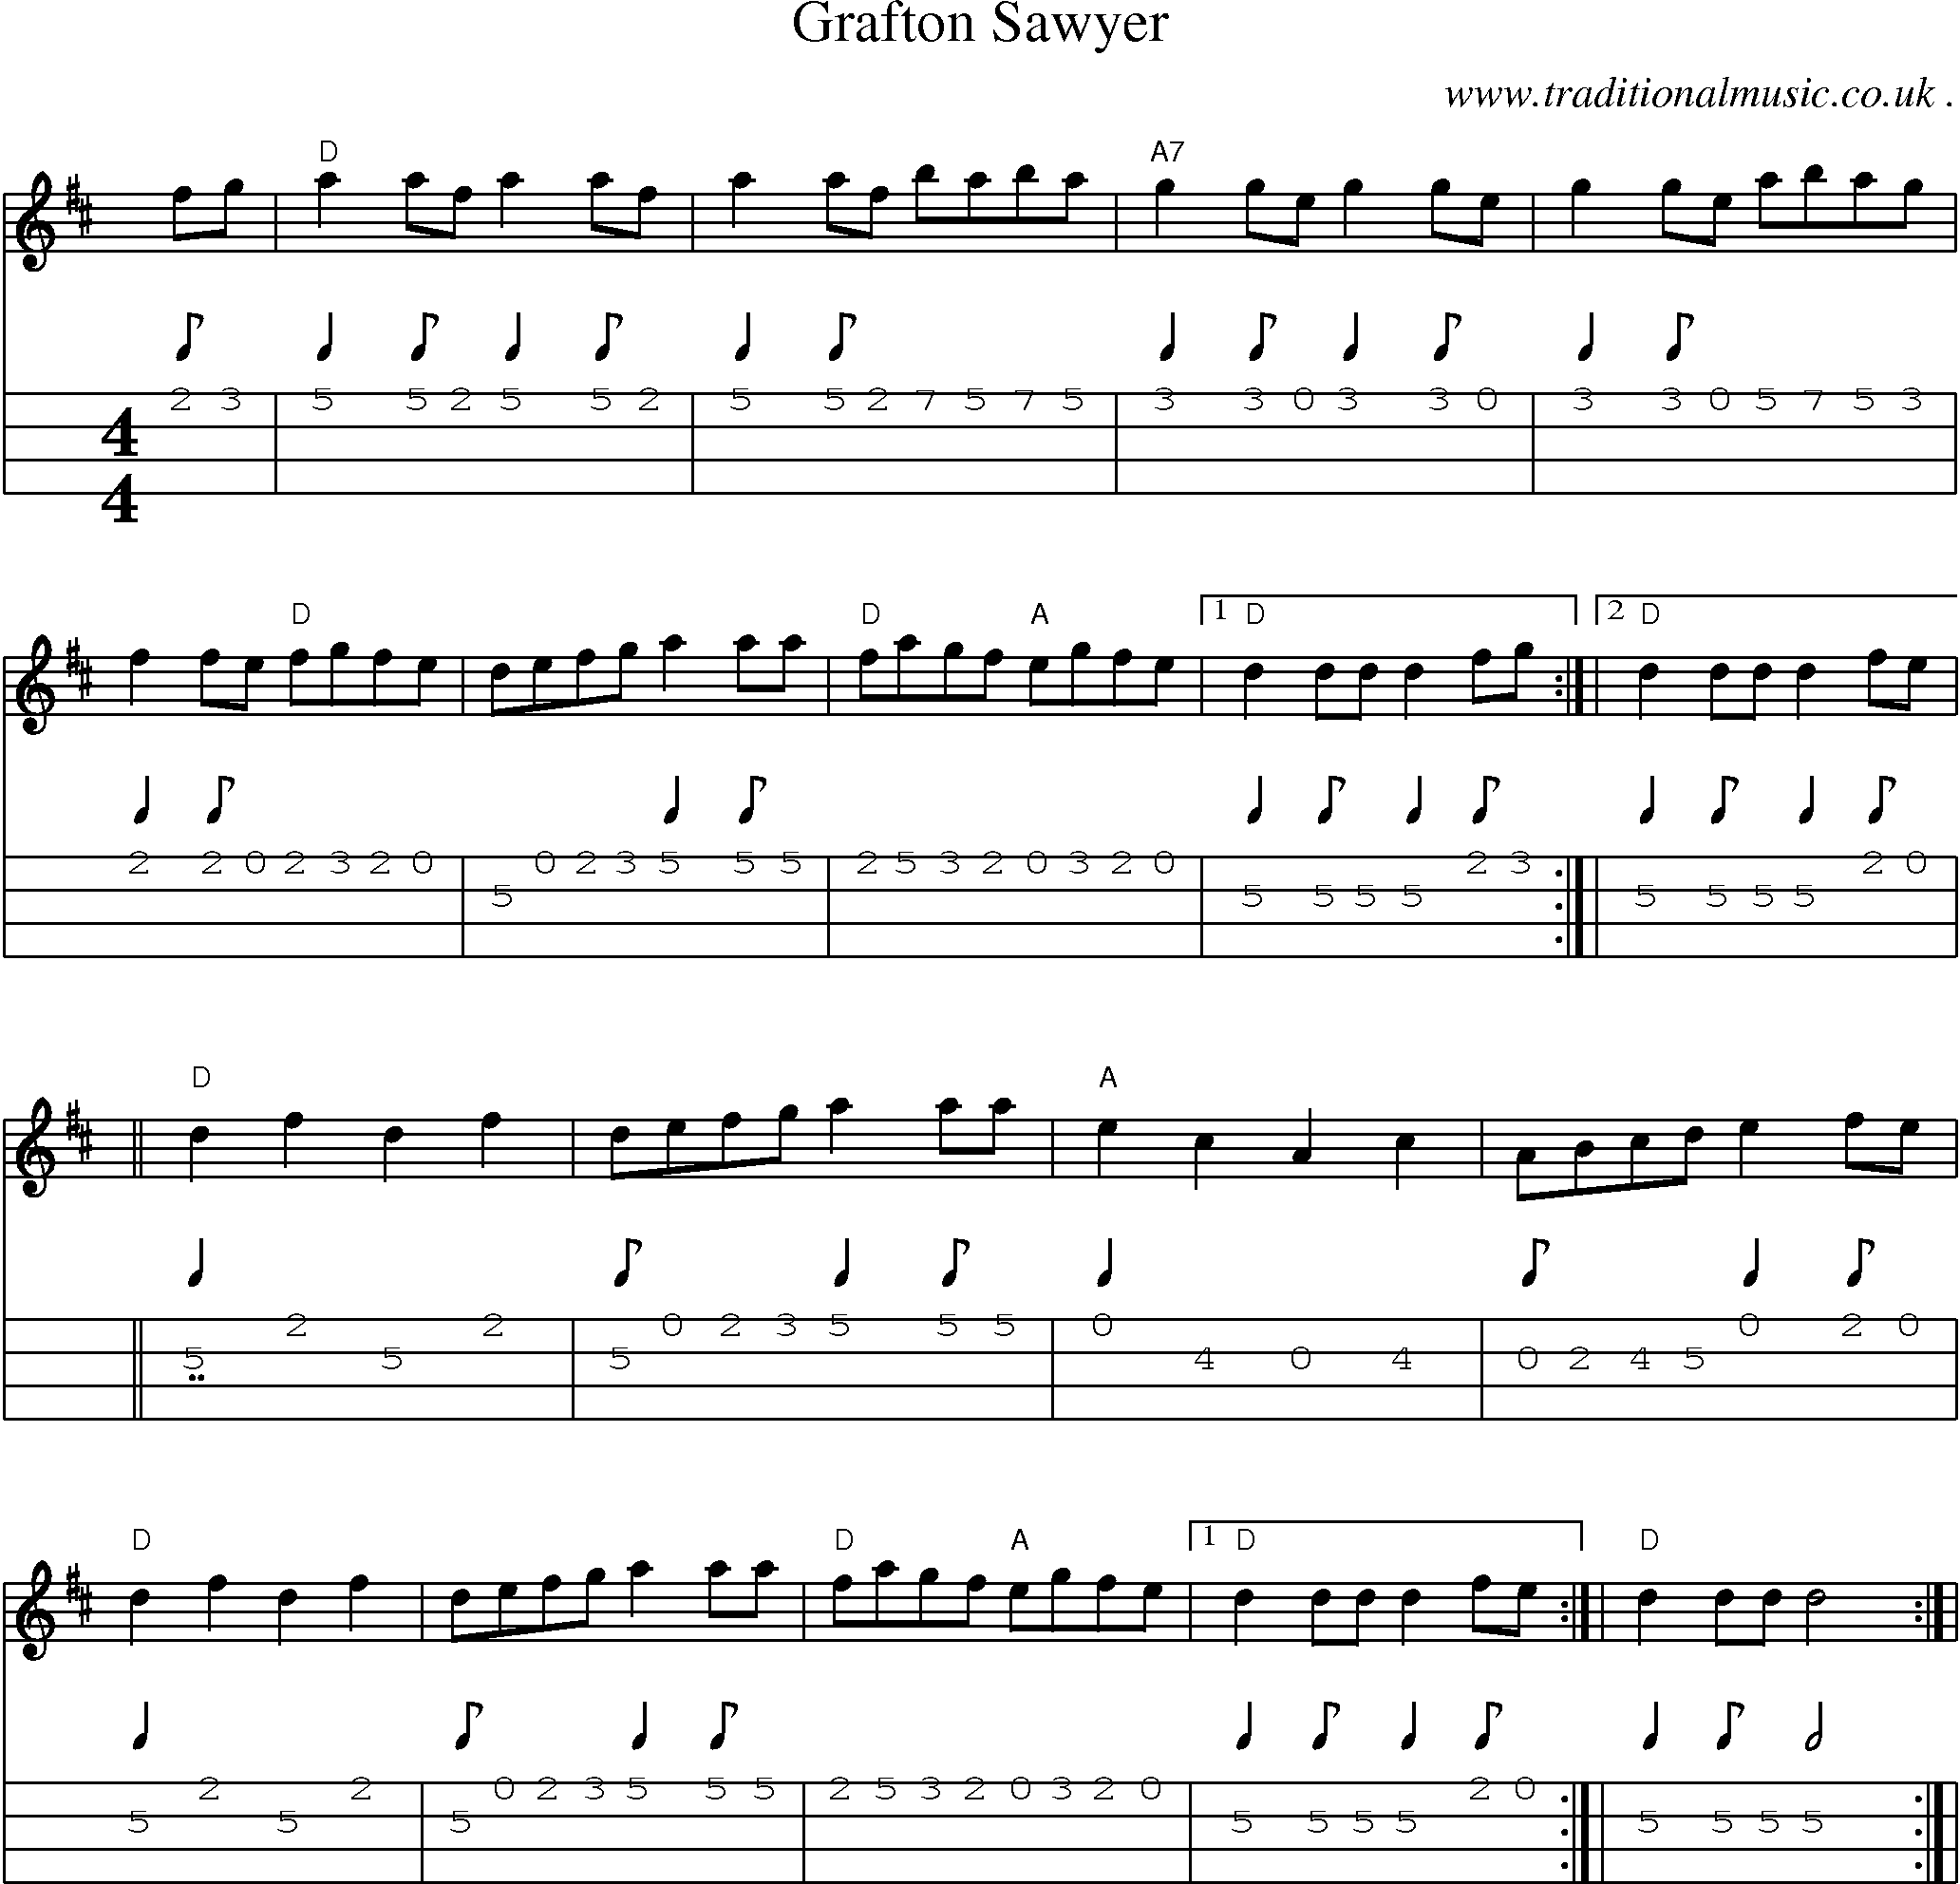 Sheet-music  score, Chords and Mandolin Tabs for Grafton Sawyer